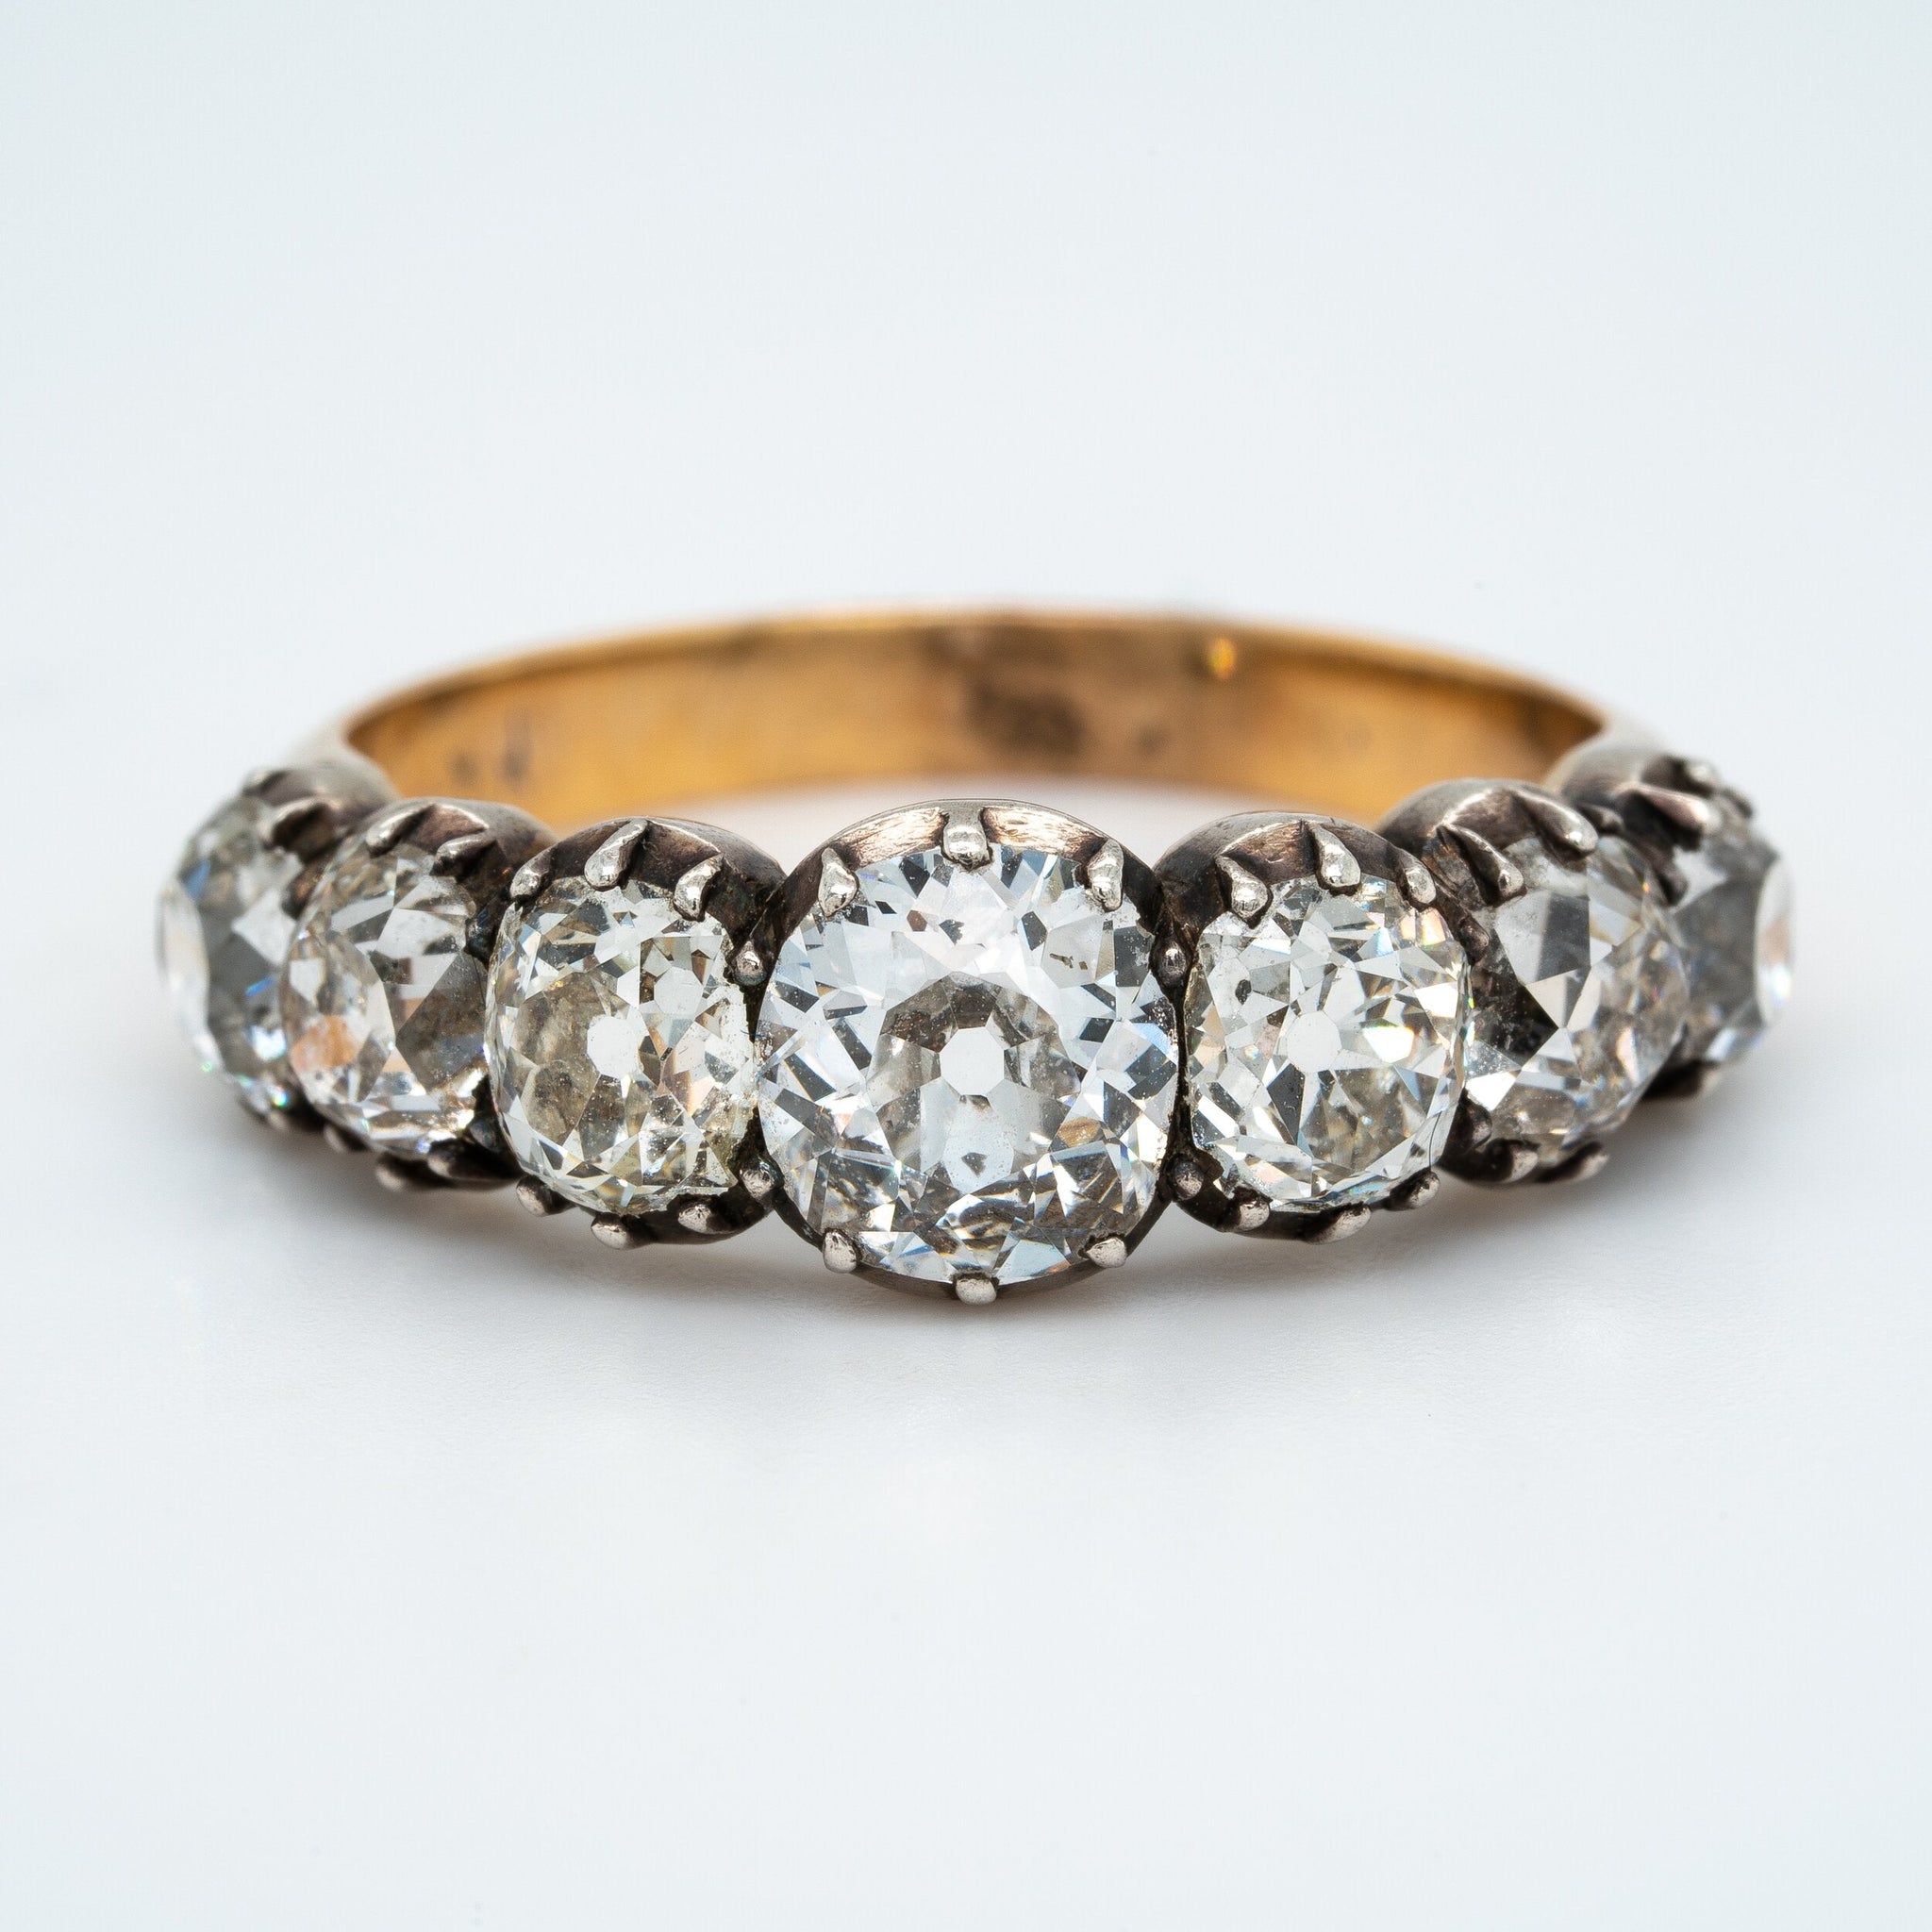 Early Victorian Diamond Ring-Charlotte Sayers Antique Jewellery